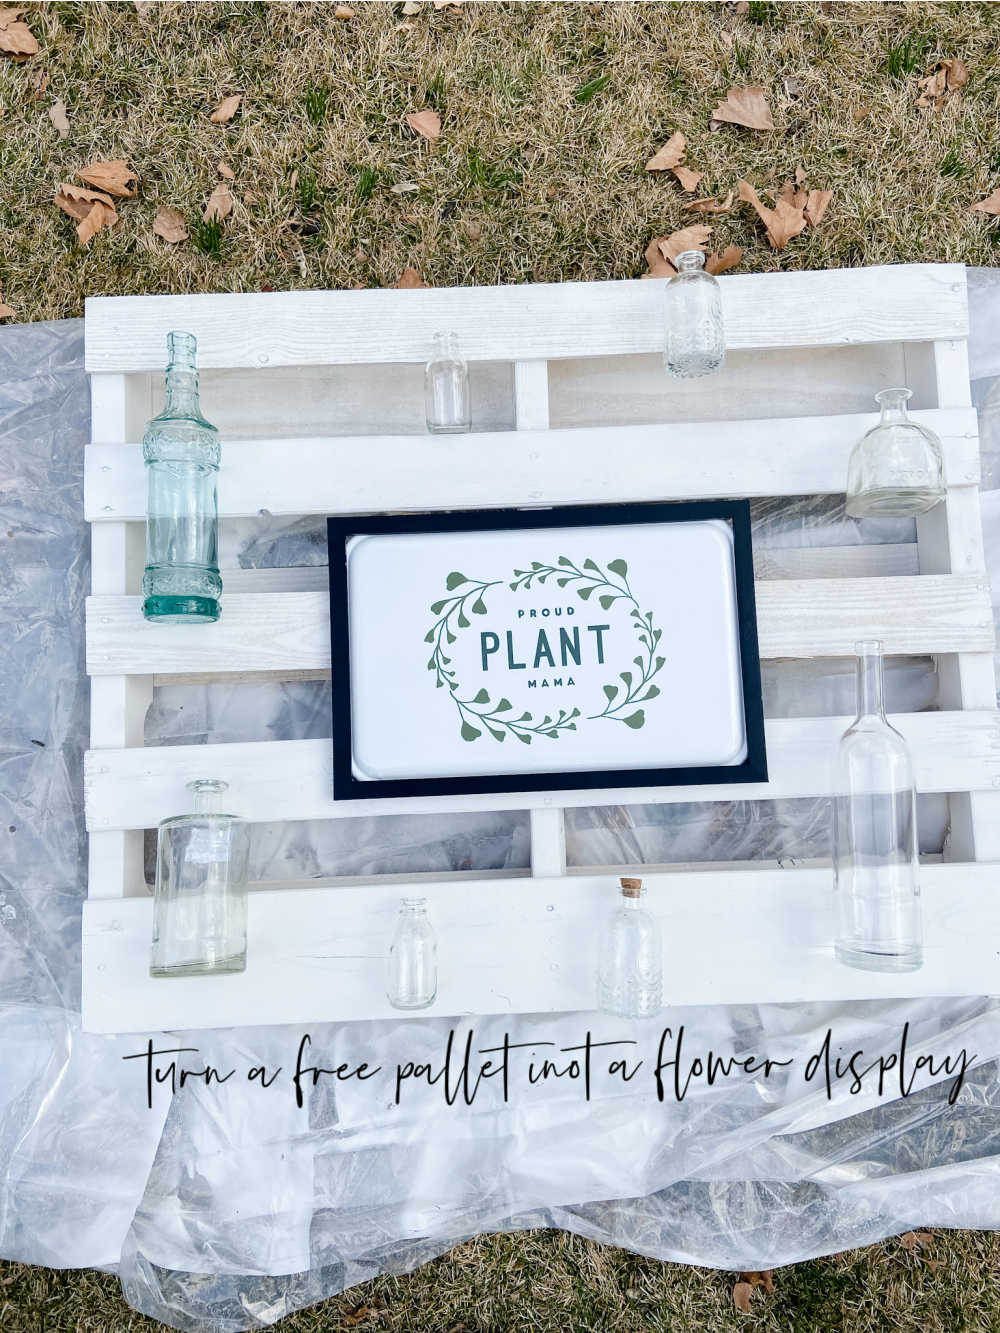 DIY Spring Pallet Flower Mantel. Turn a free pallet into a beautiful vertical flower and sign display that can be changed out seasonally!